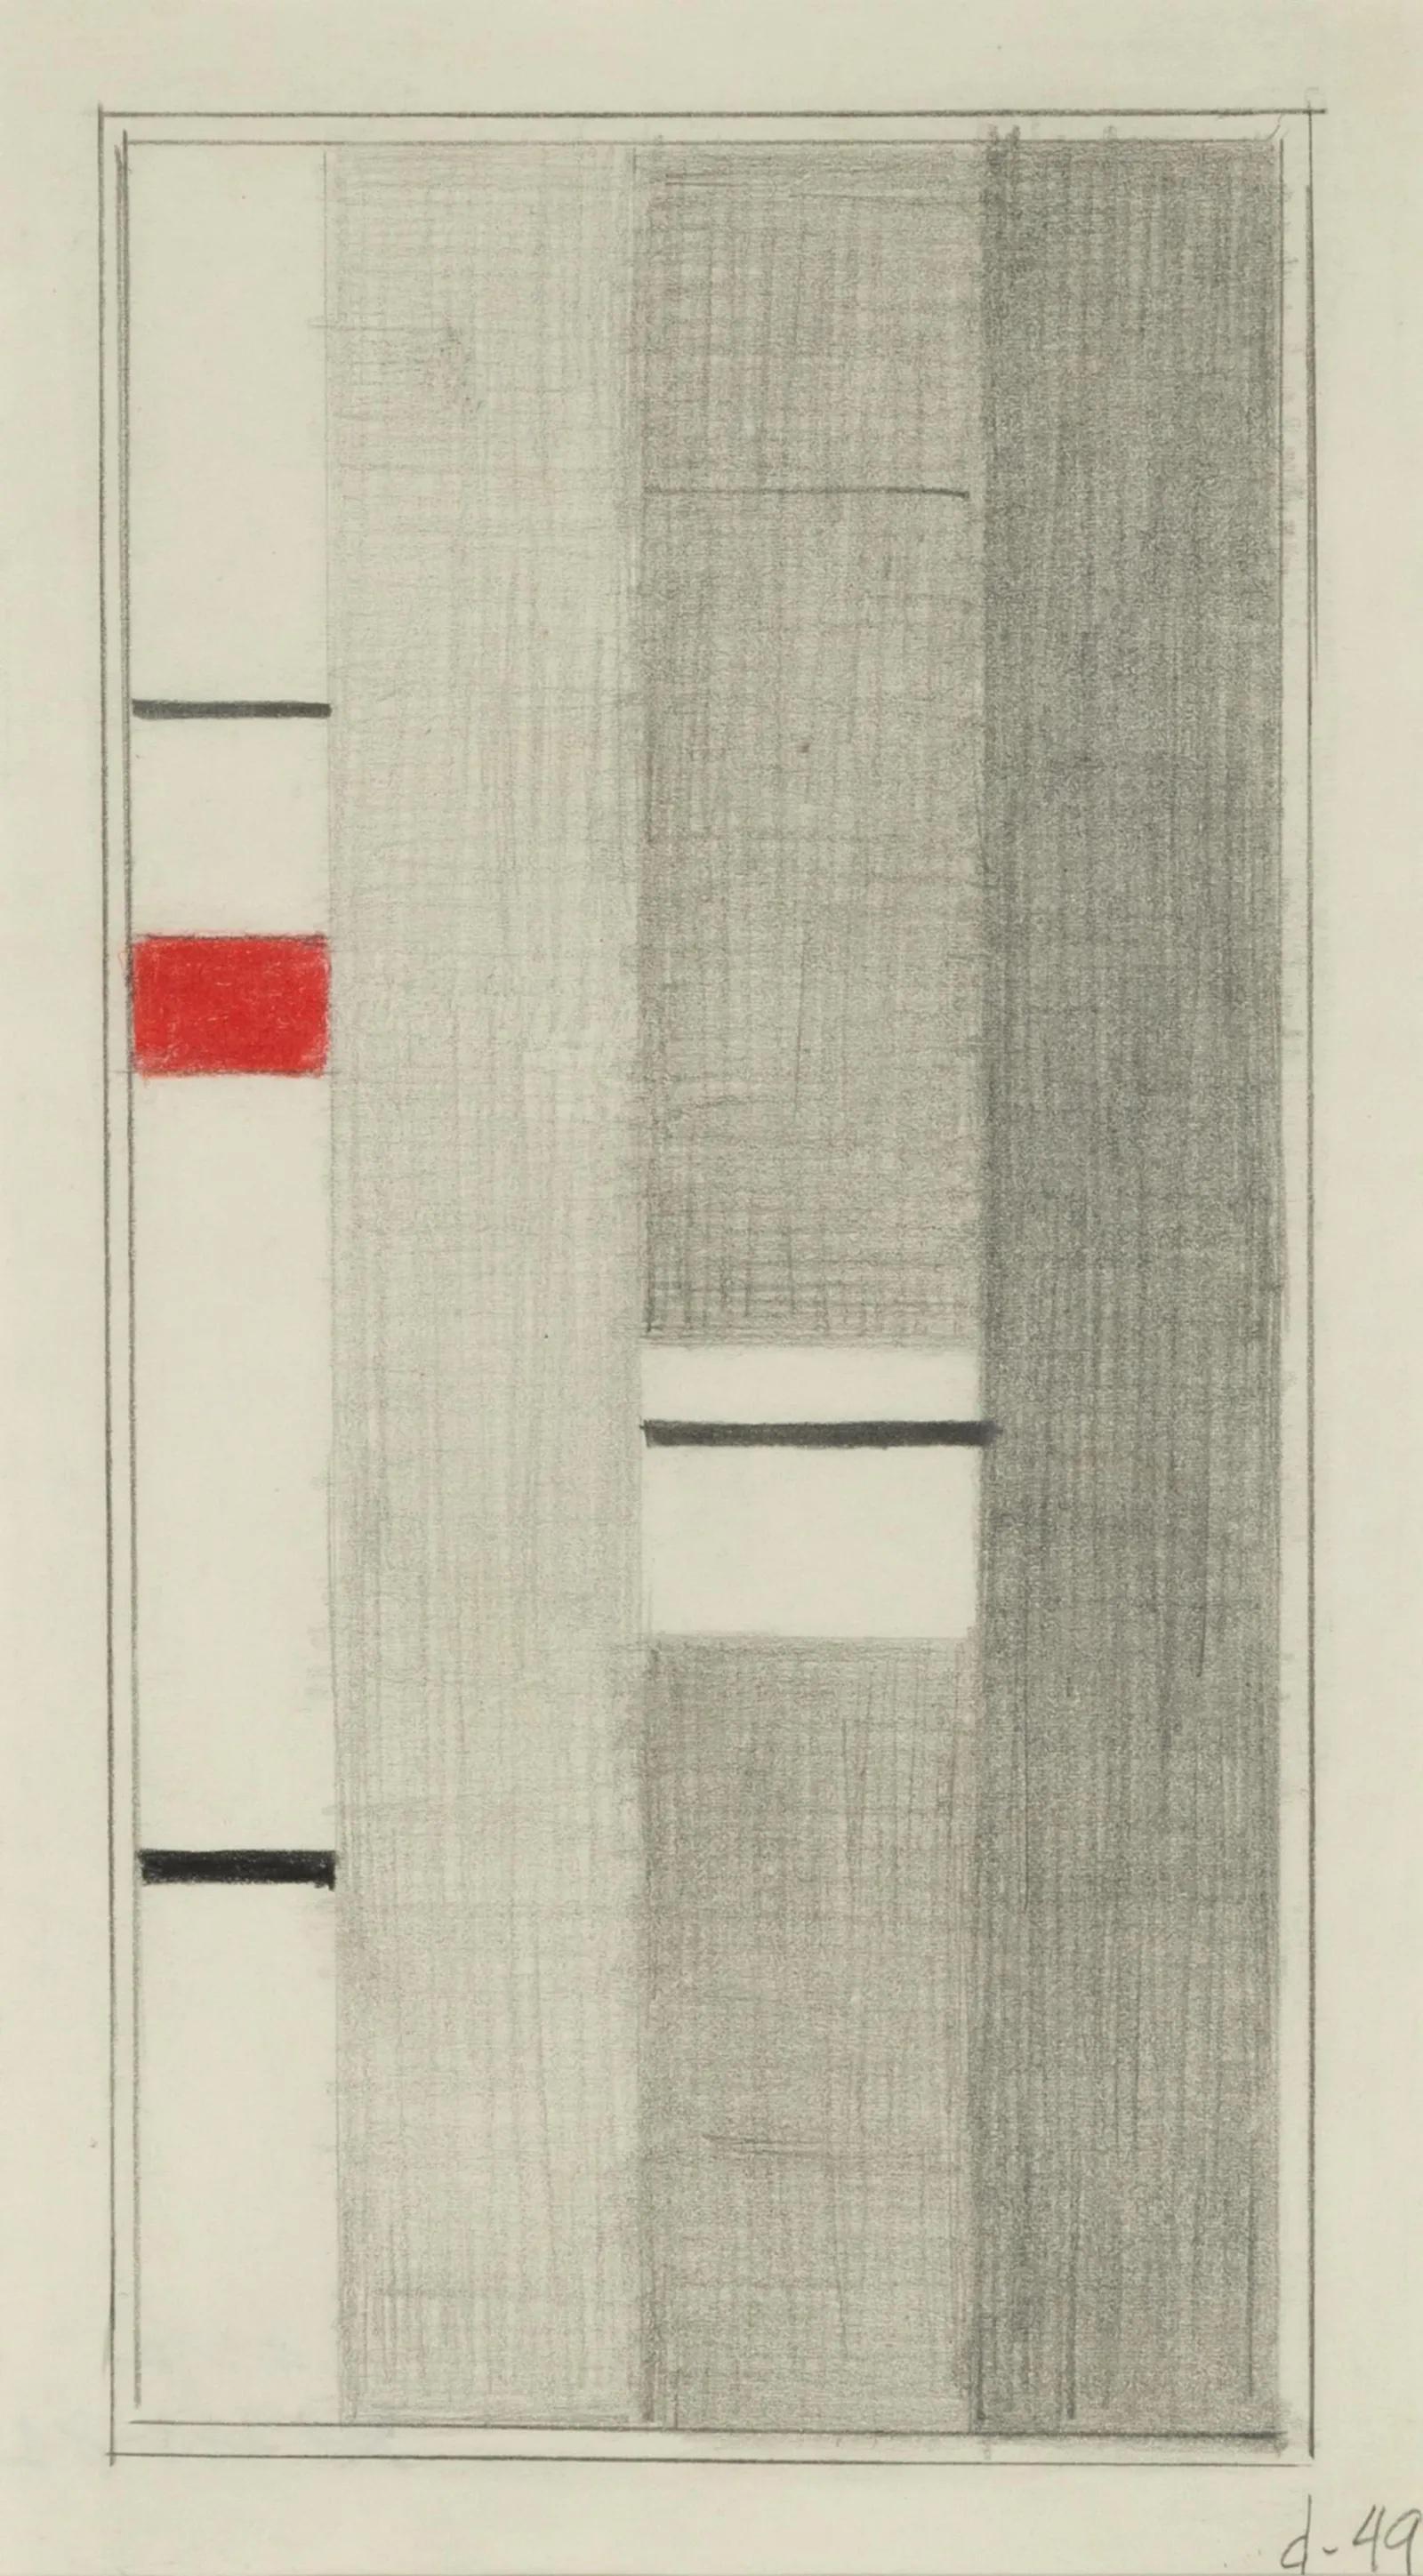 Burgoyne Diller Abstract Drawing - "Second Theme" 1949 Abstract Mid 20th Century Geometric Non-Objective Hard Edge